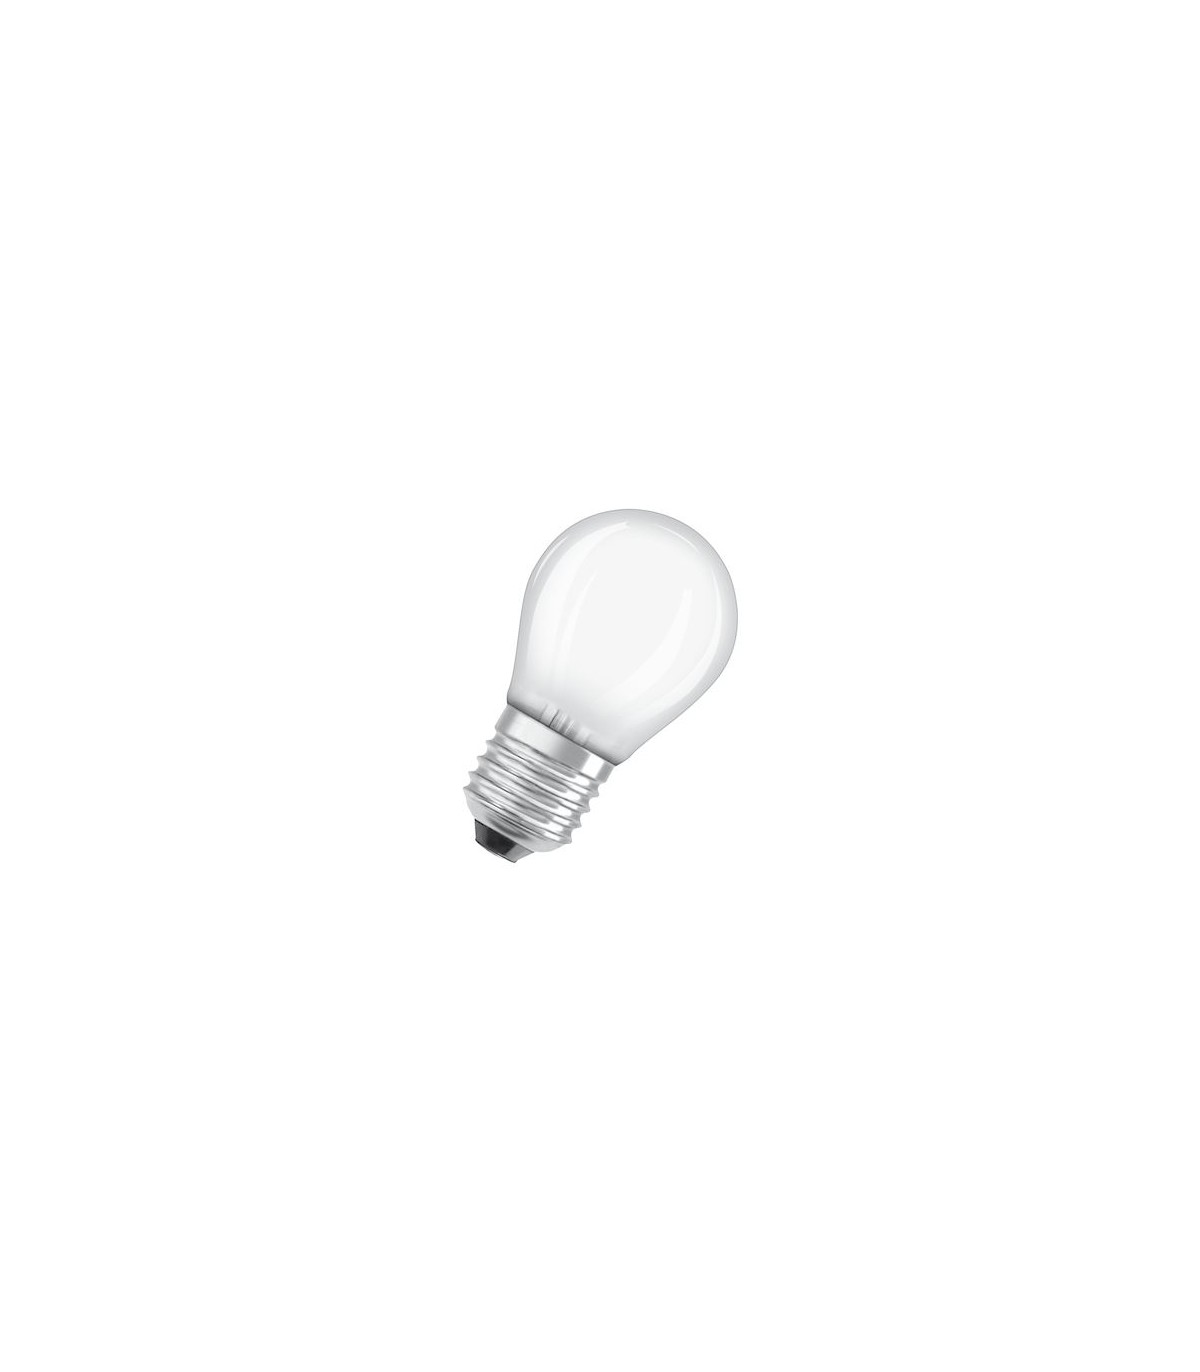 Ampoule led, capsule G9, 470lm = 40W, blanc chaud, dimmable, OSRAM